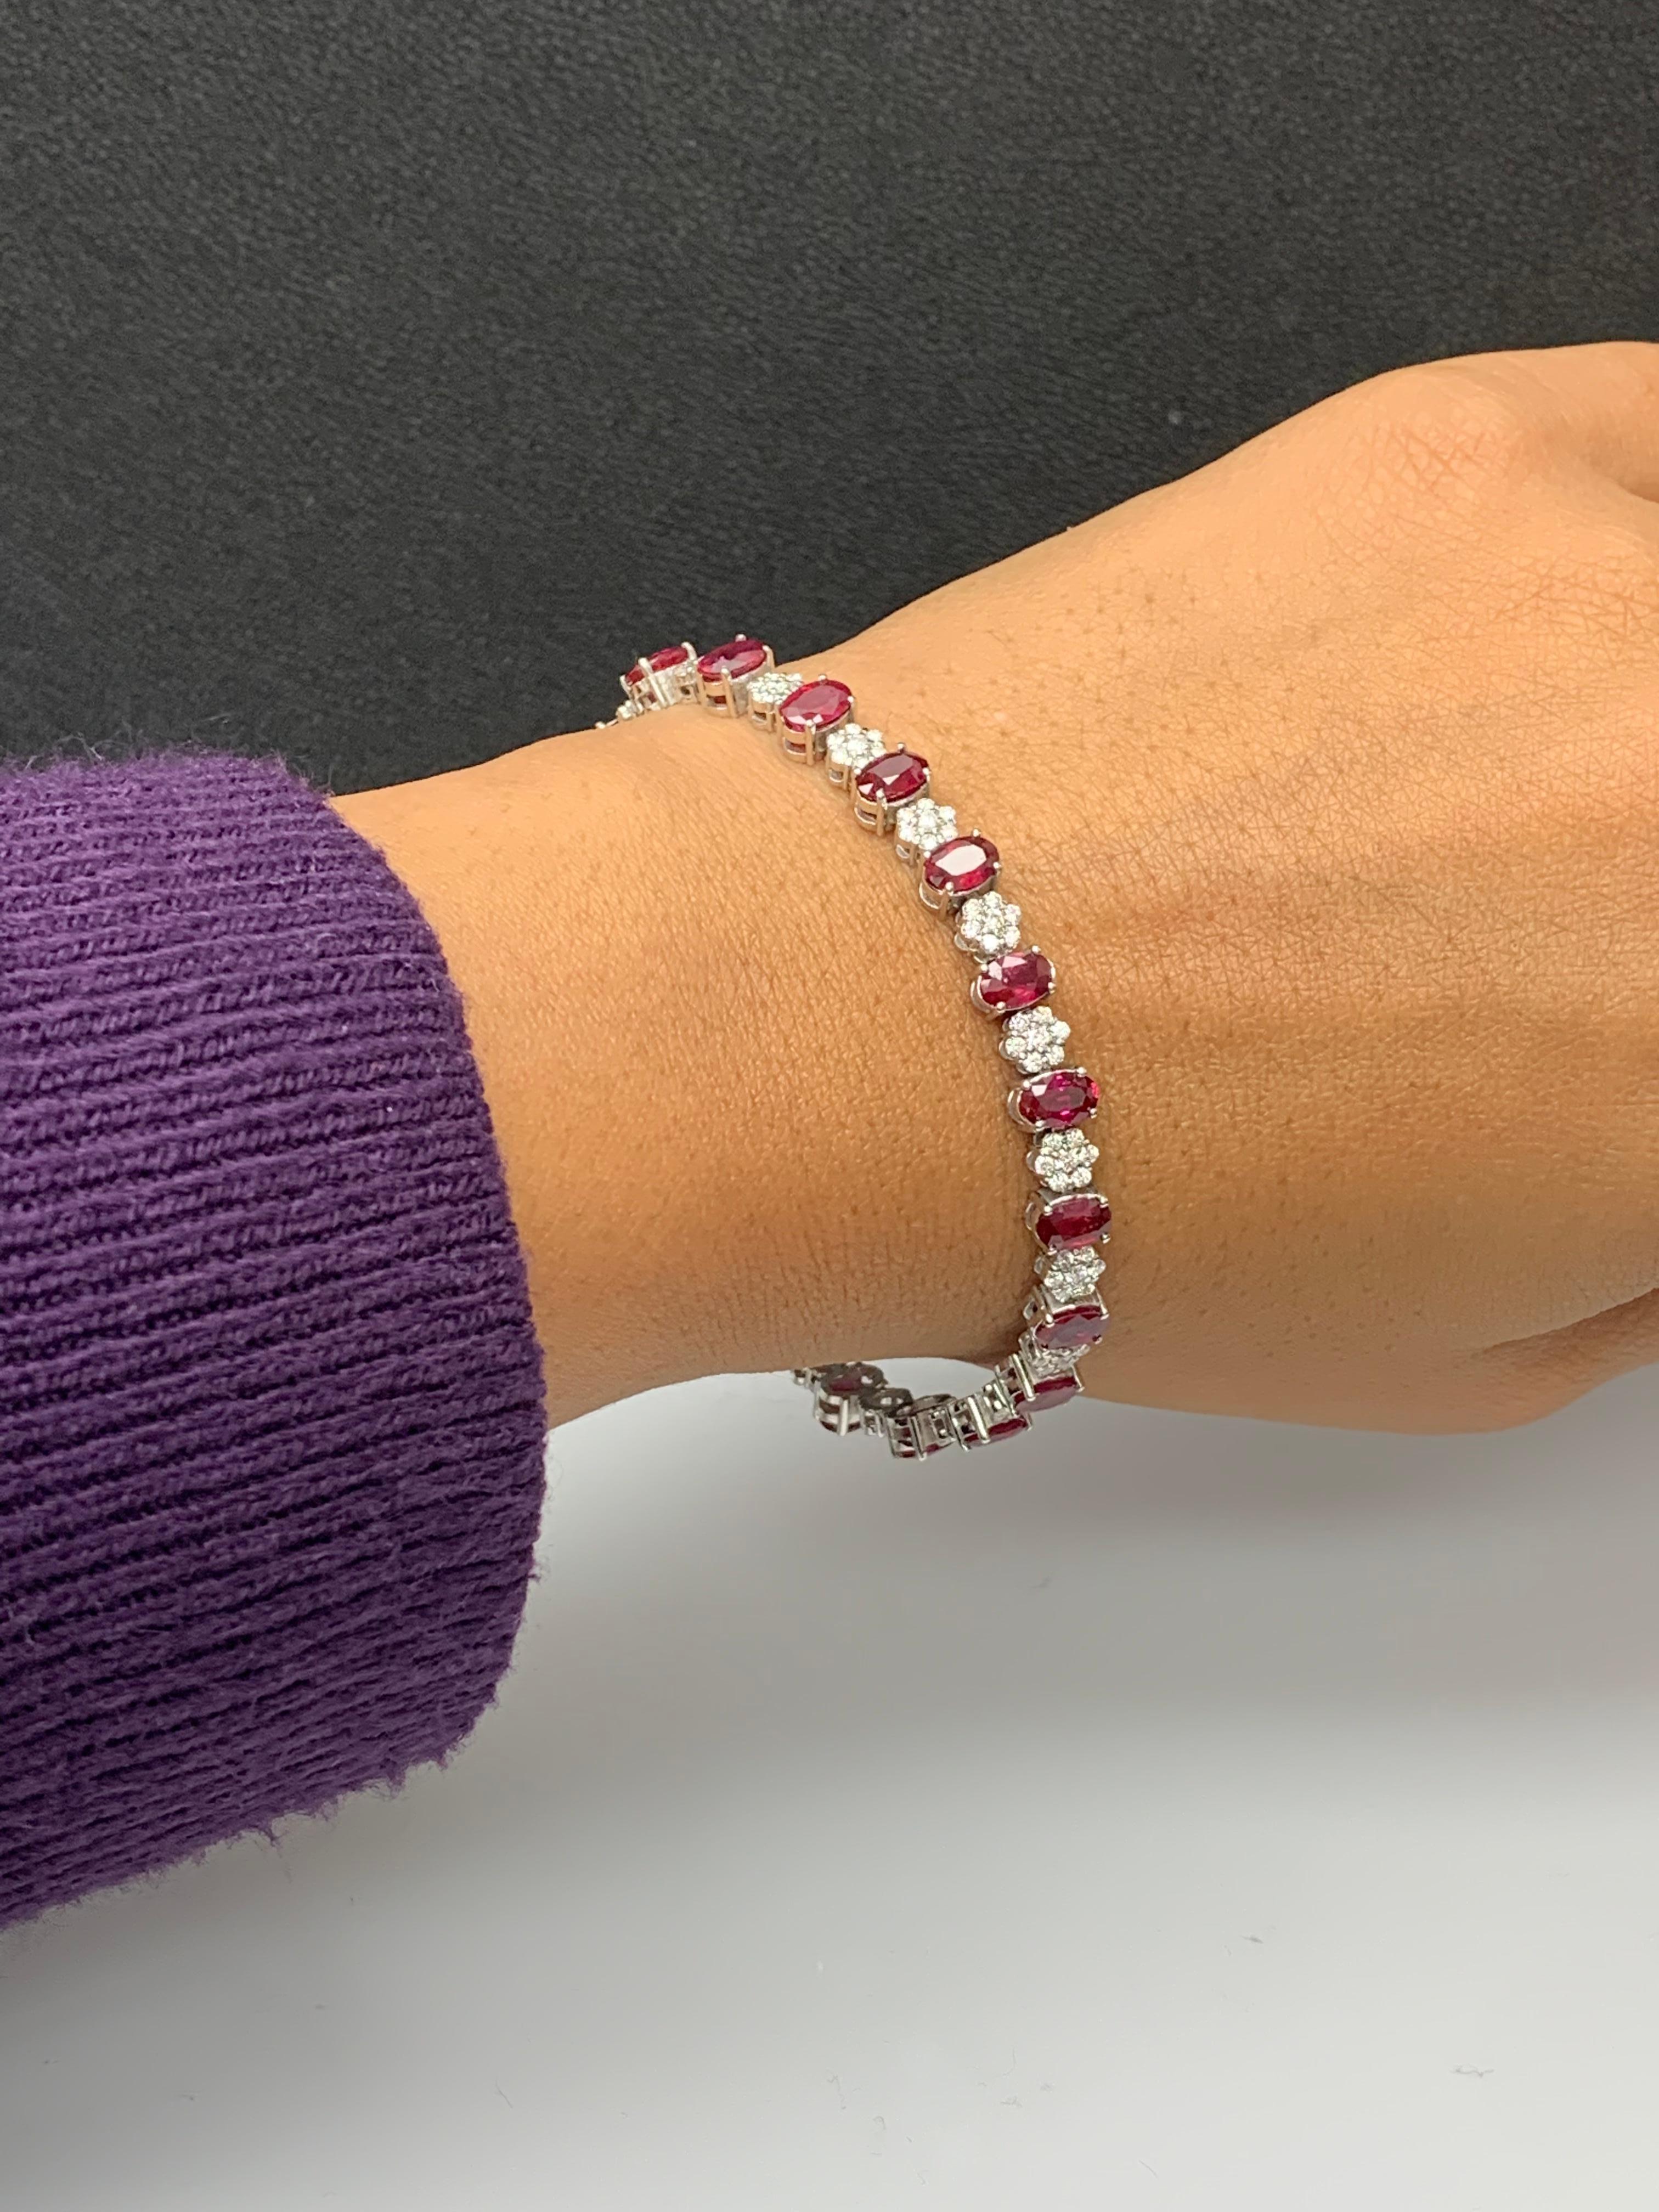 10.34 Carat Oval Cut Ruby and Diamond Tennis Bracelet in 14K White Gold For Sale 4